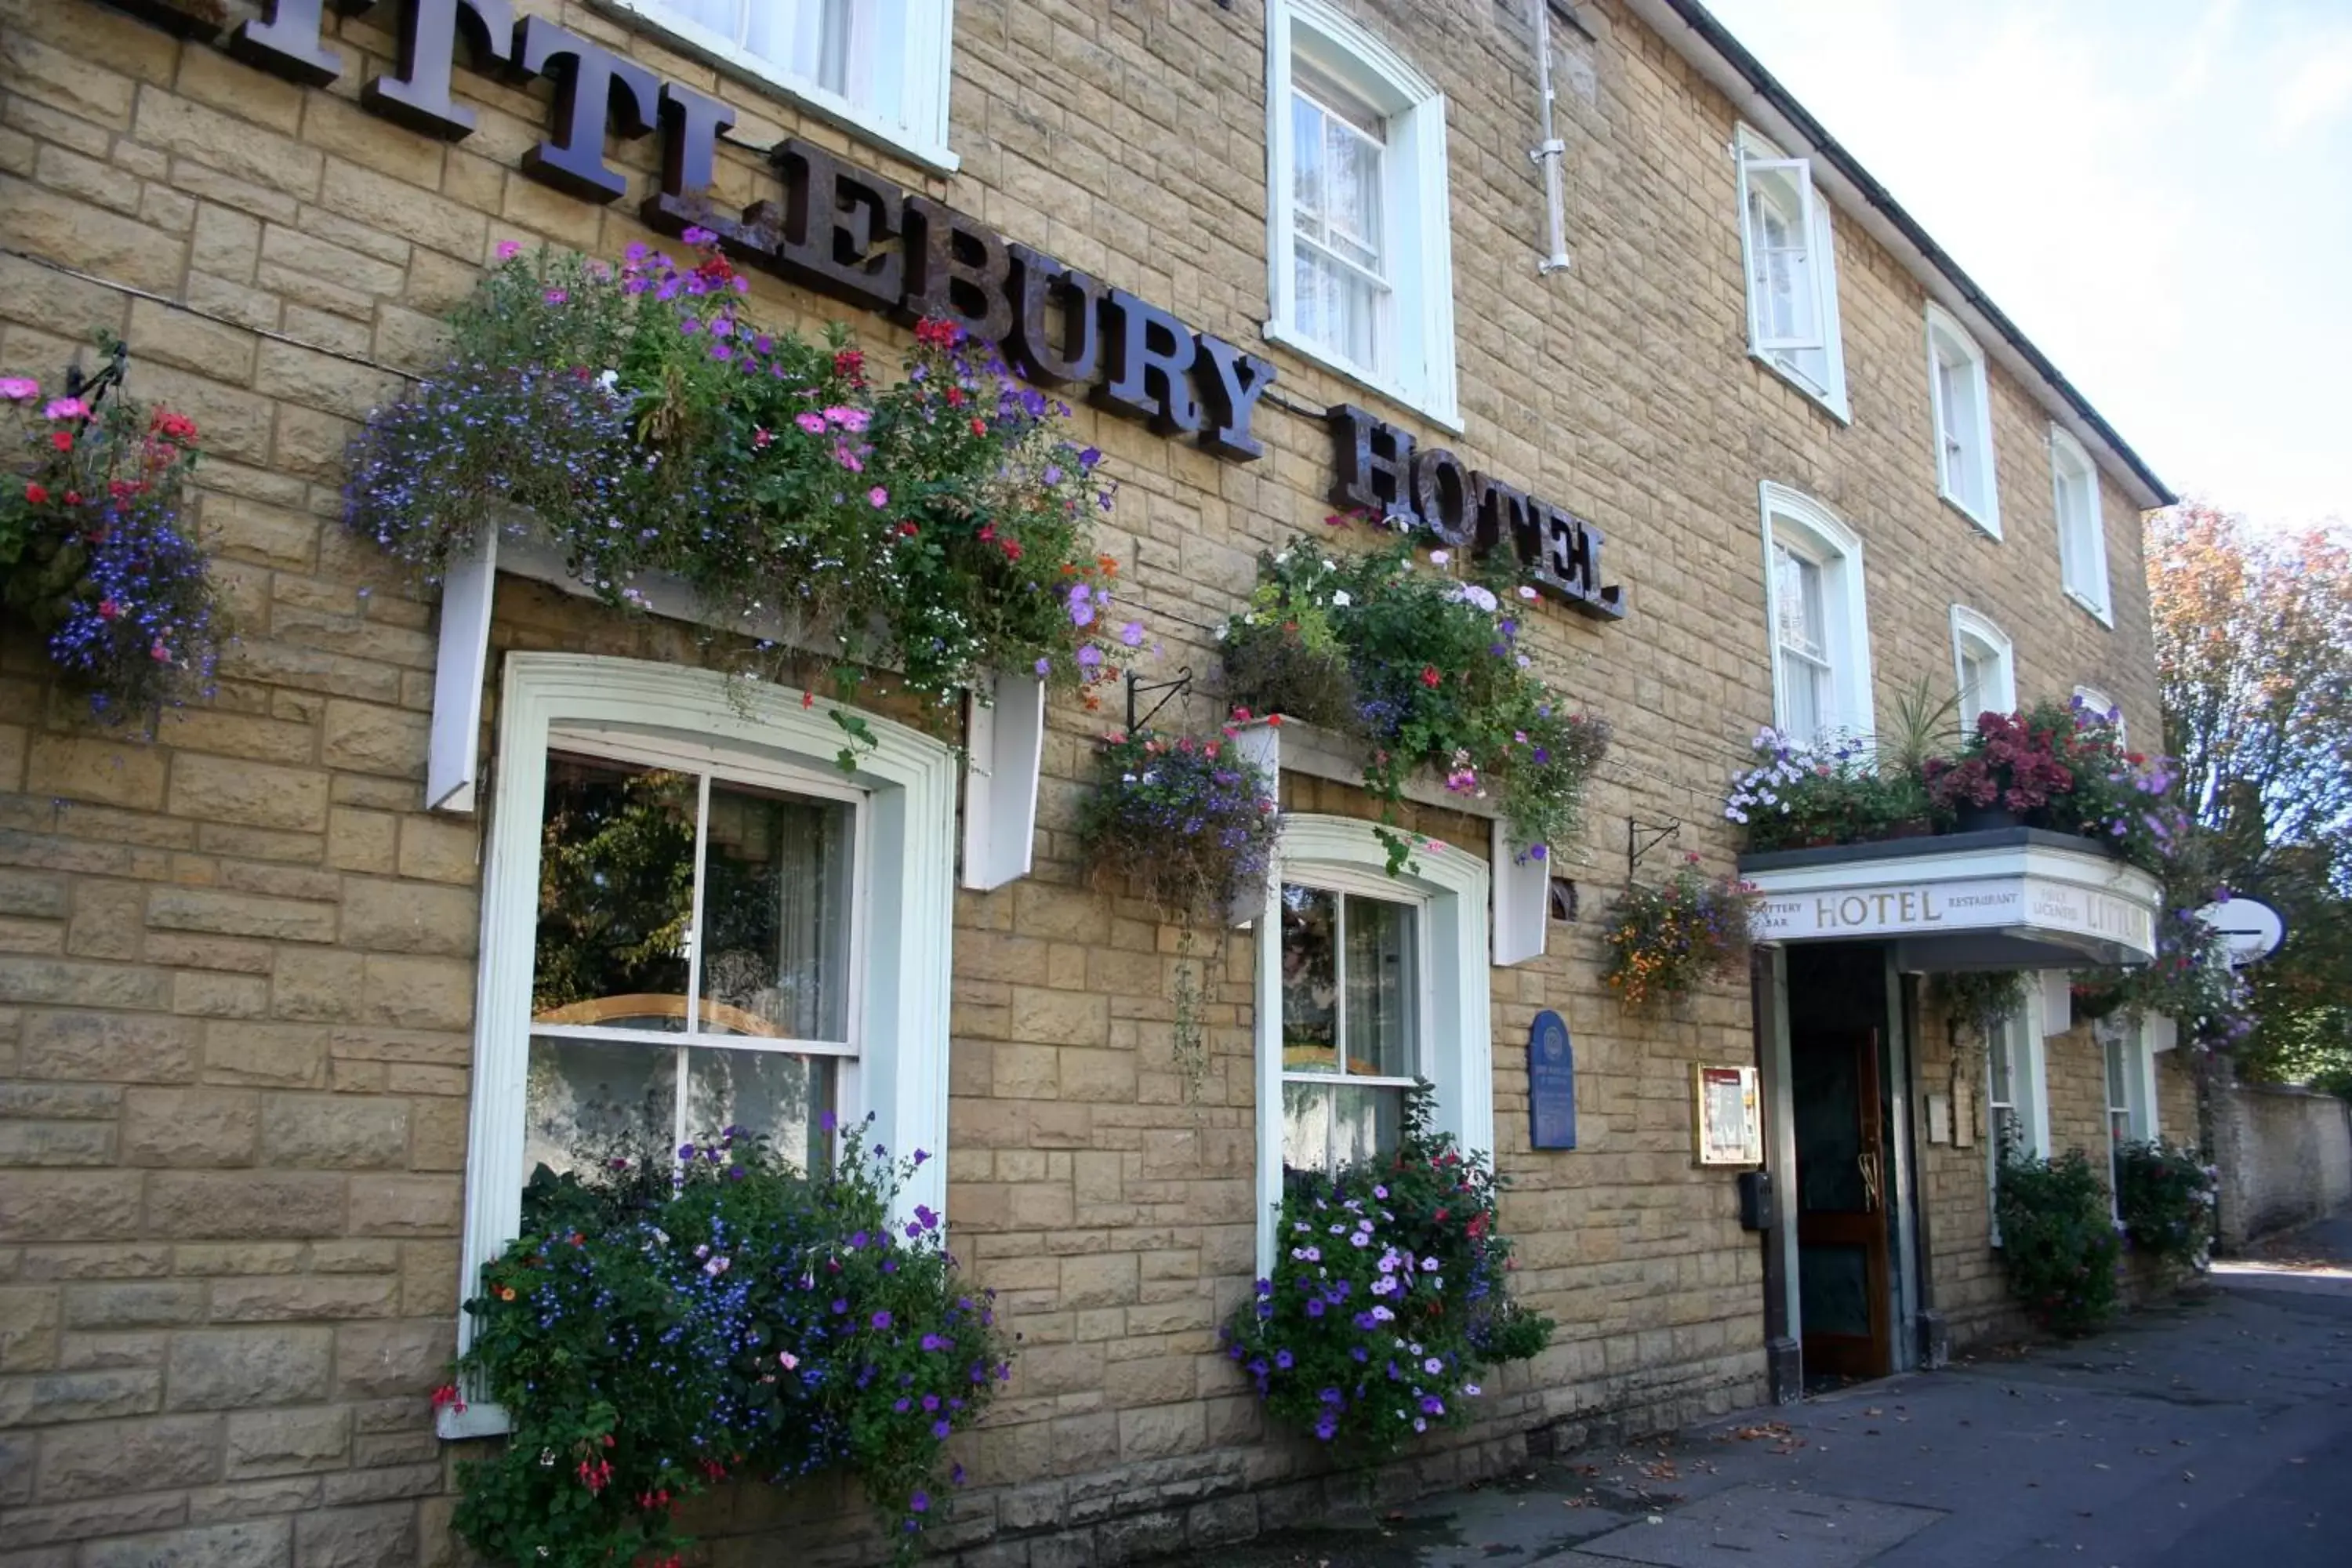 Property building in Littlebury Hotel